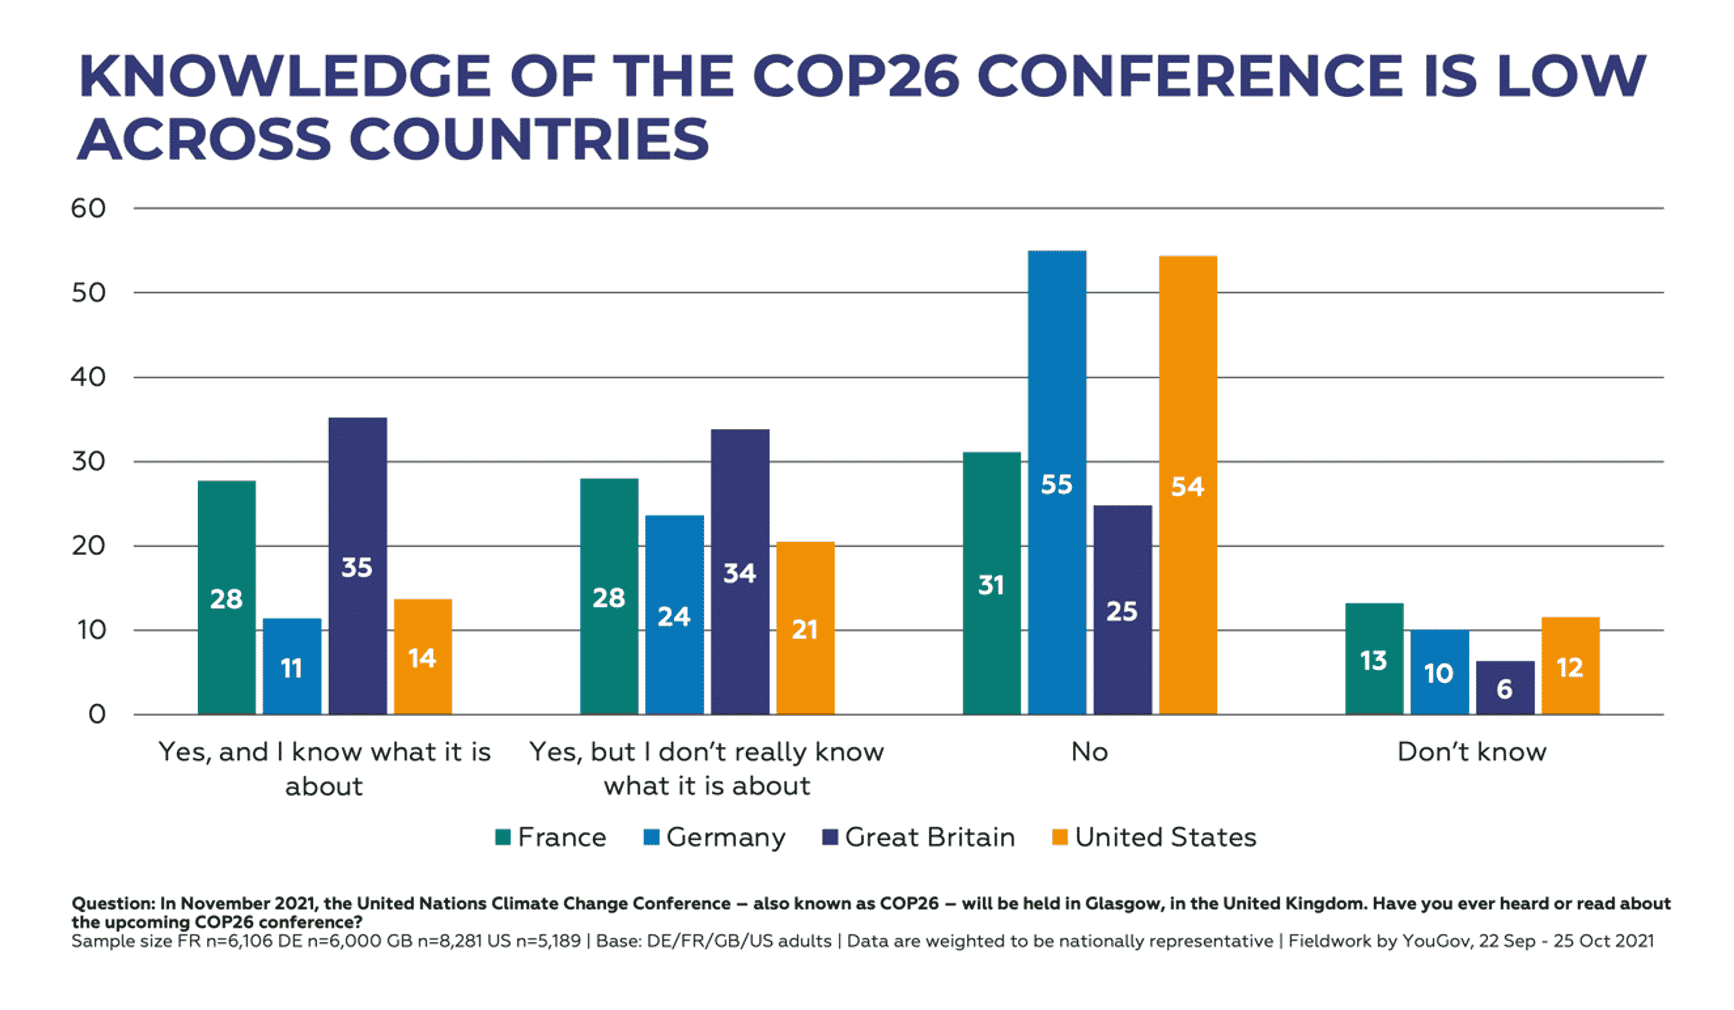 Knowledge of COP26 is low across countries